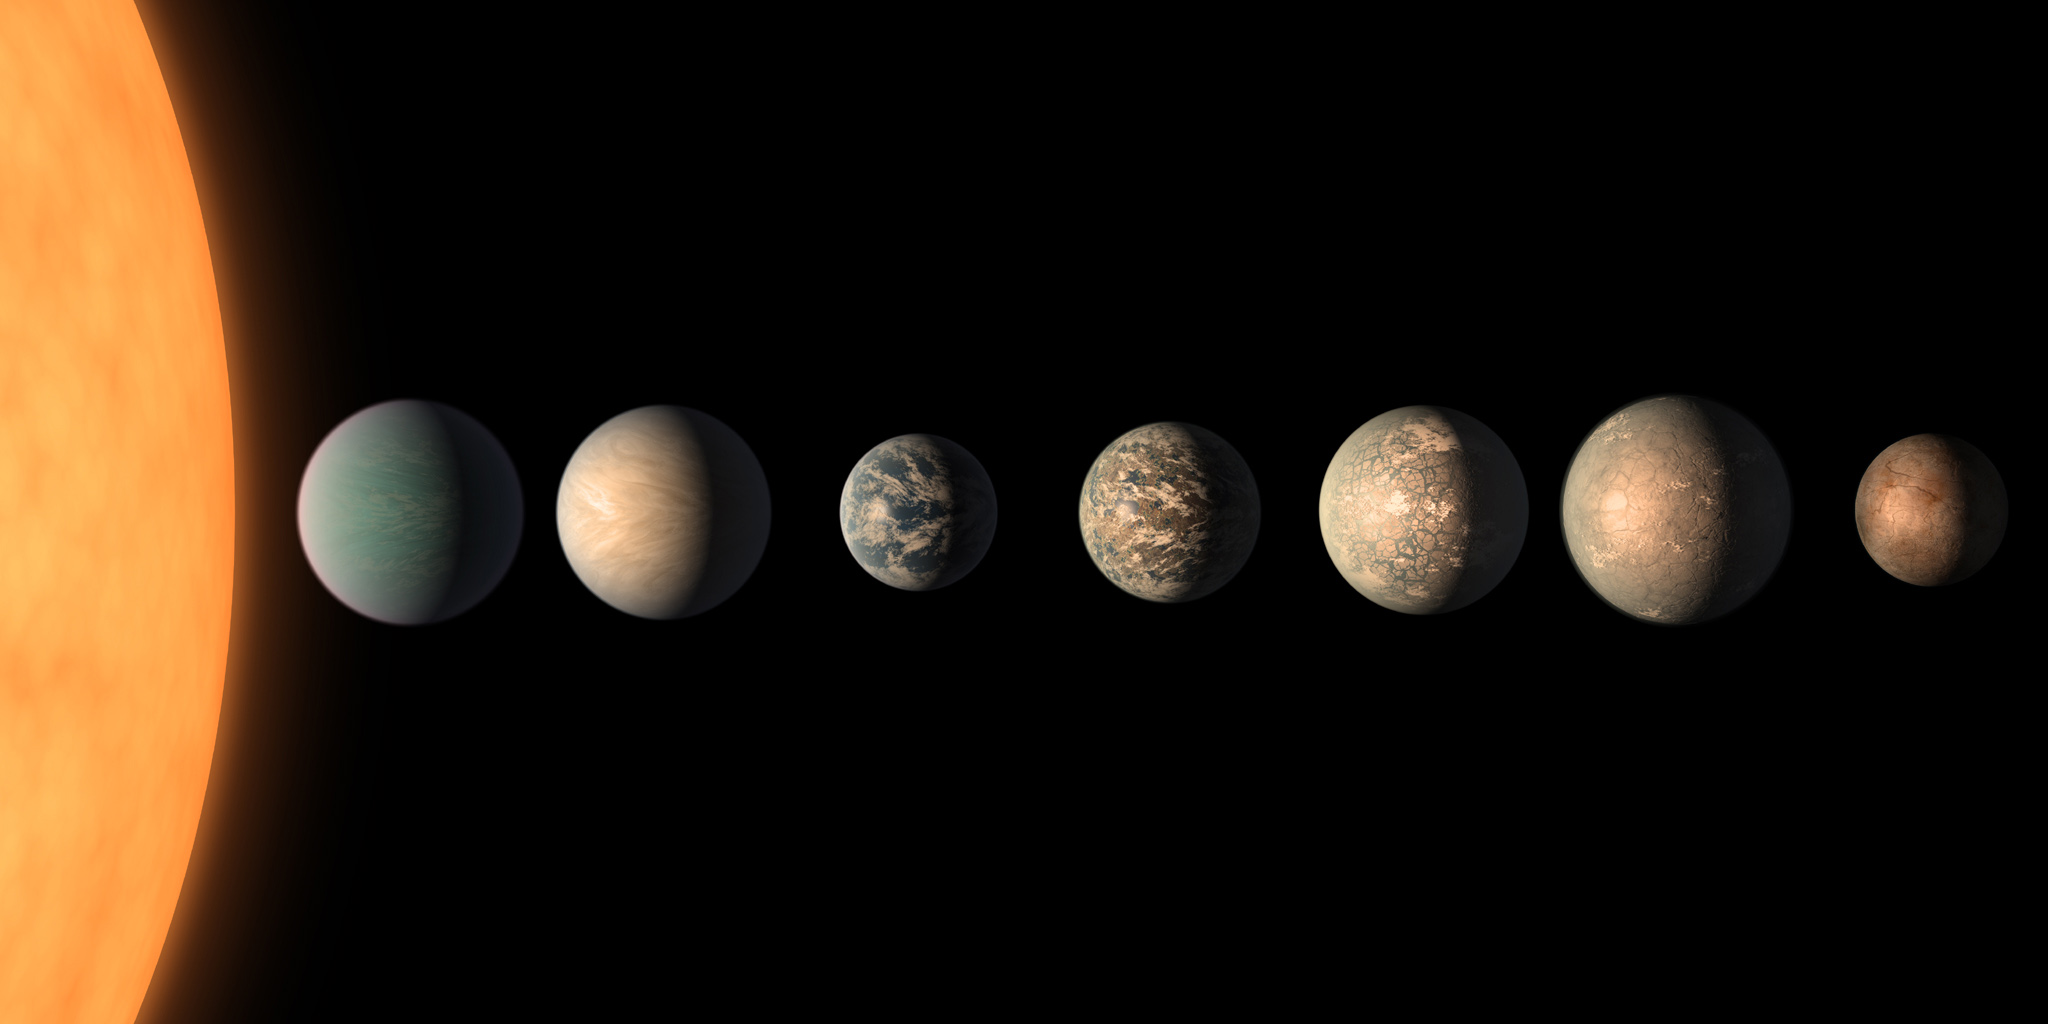 Artist's concept of exoplanets